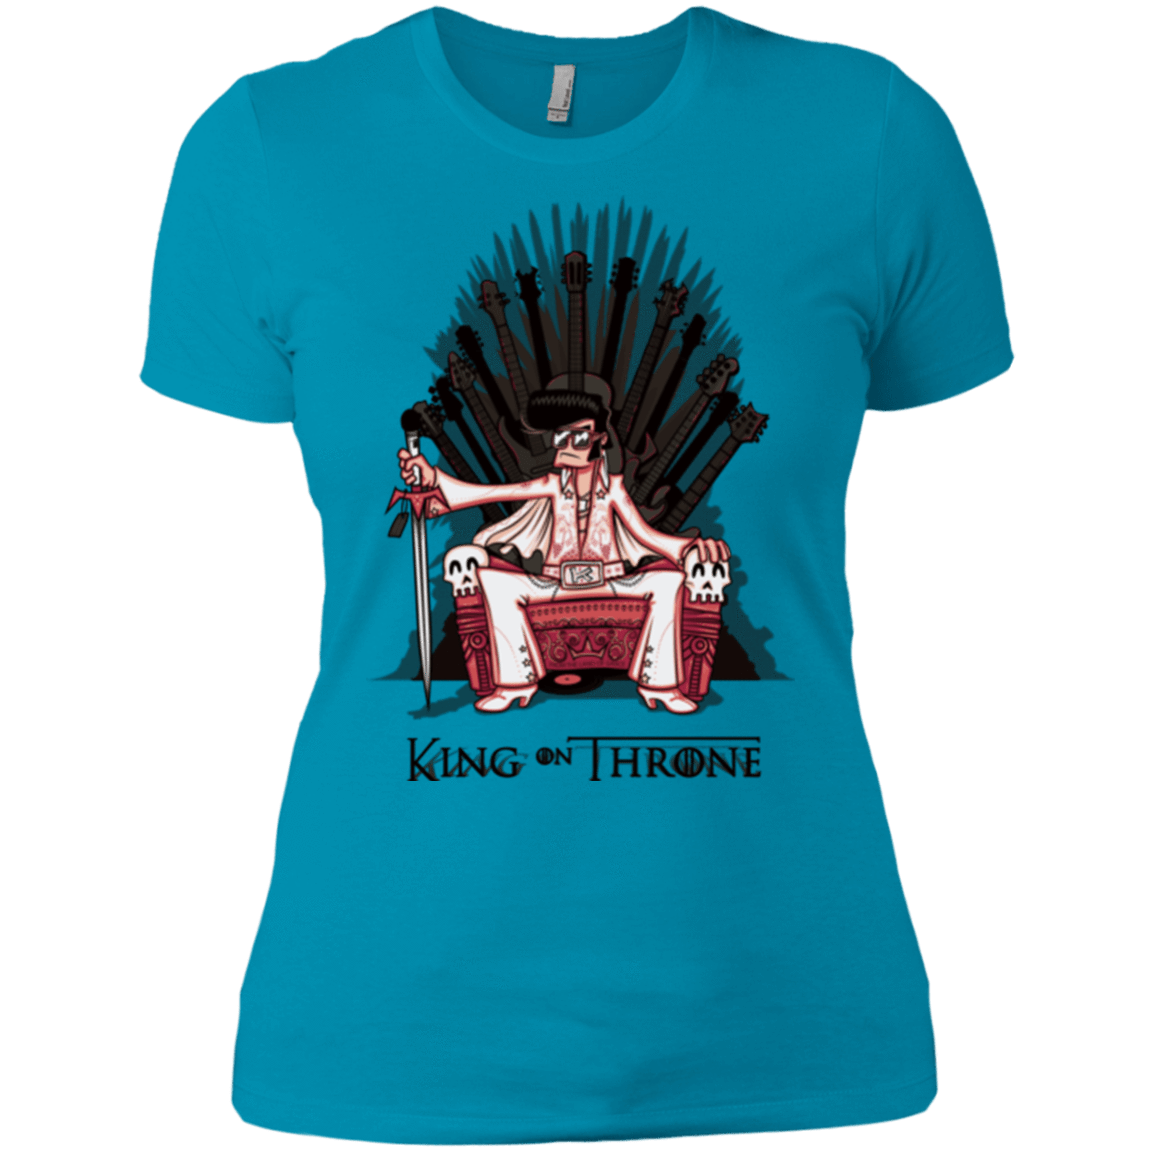 T-Shirts Turquoise / X-Small King on Throne Women's Premium T-Shirt